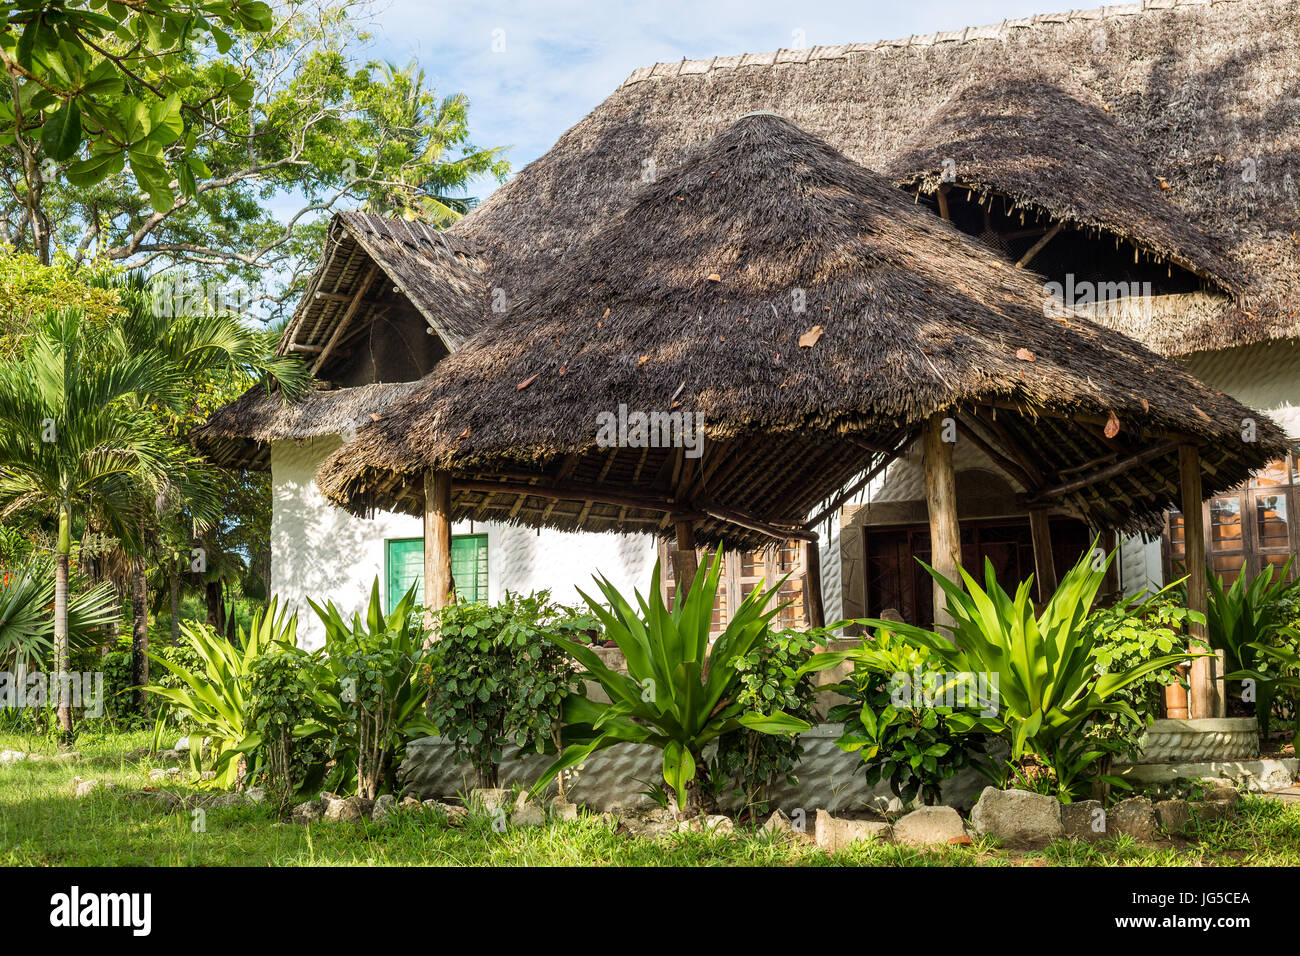 Luxury lodging in east african style, Kenya Stock Photo